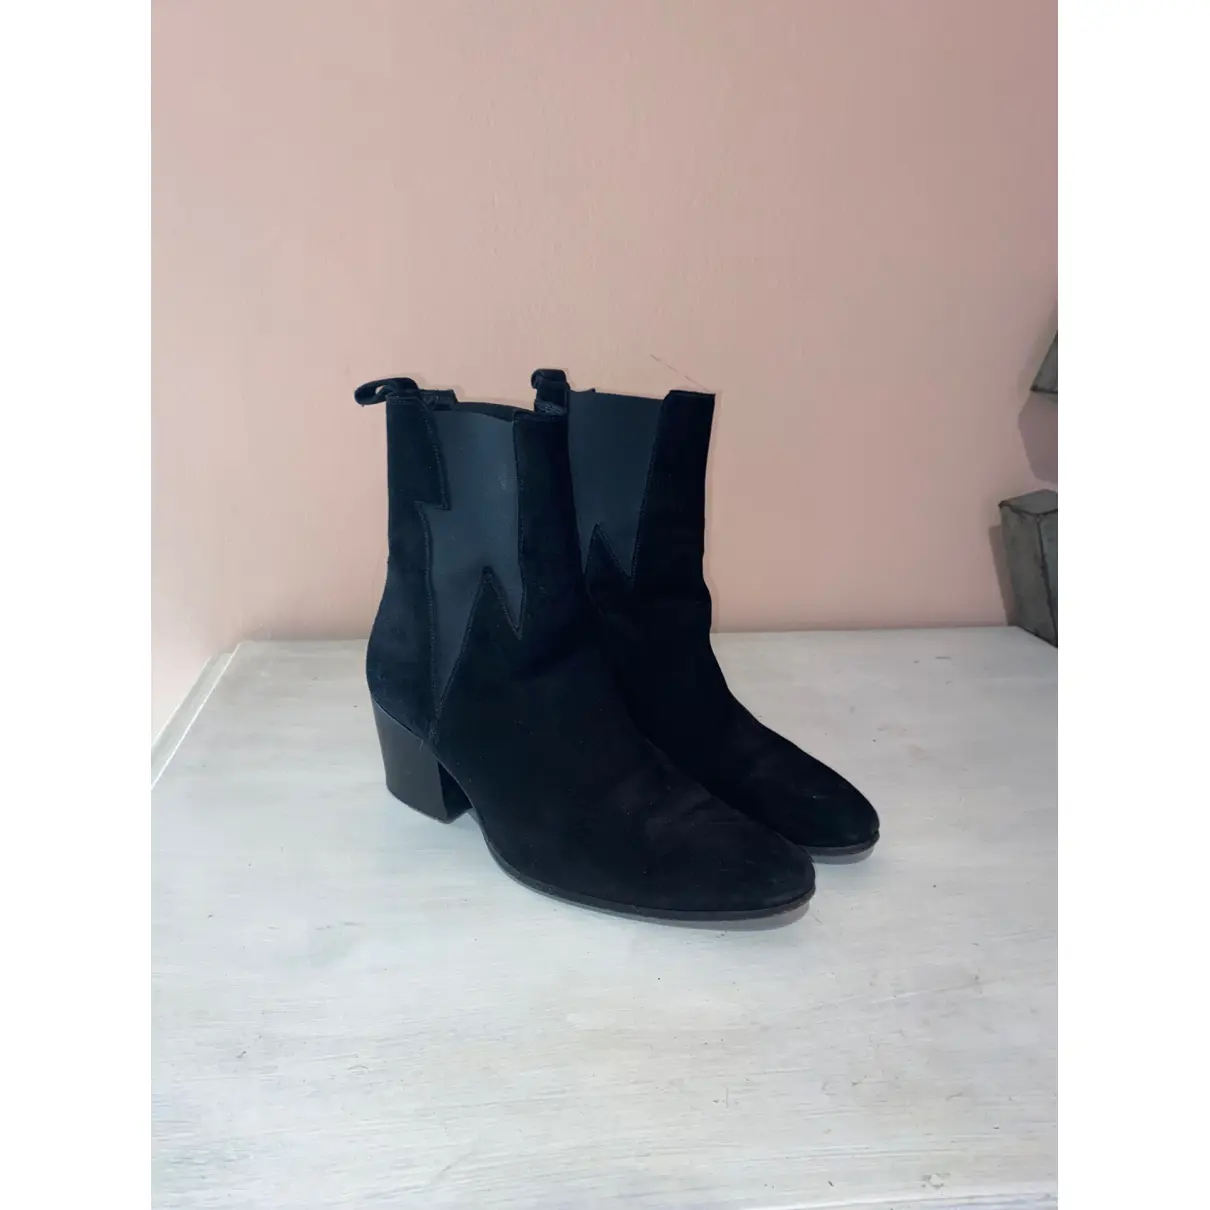 Buy Barbanera Ankle boots online